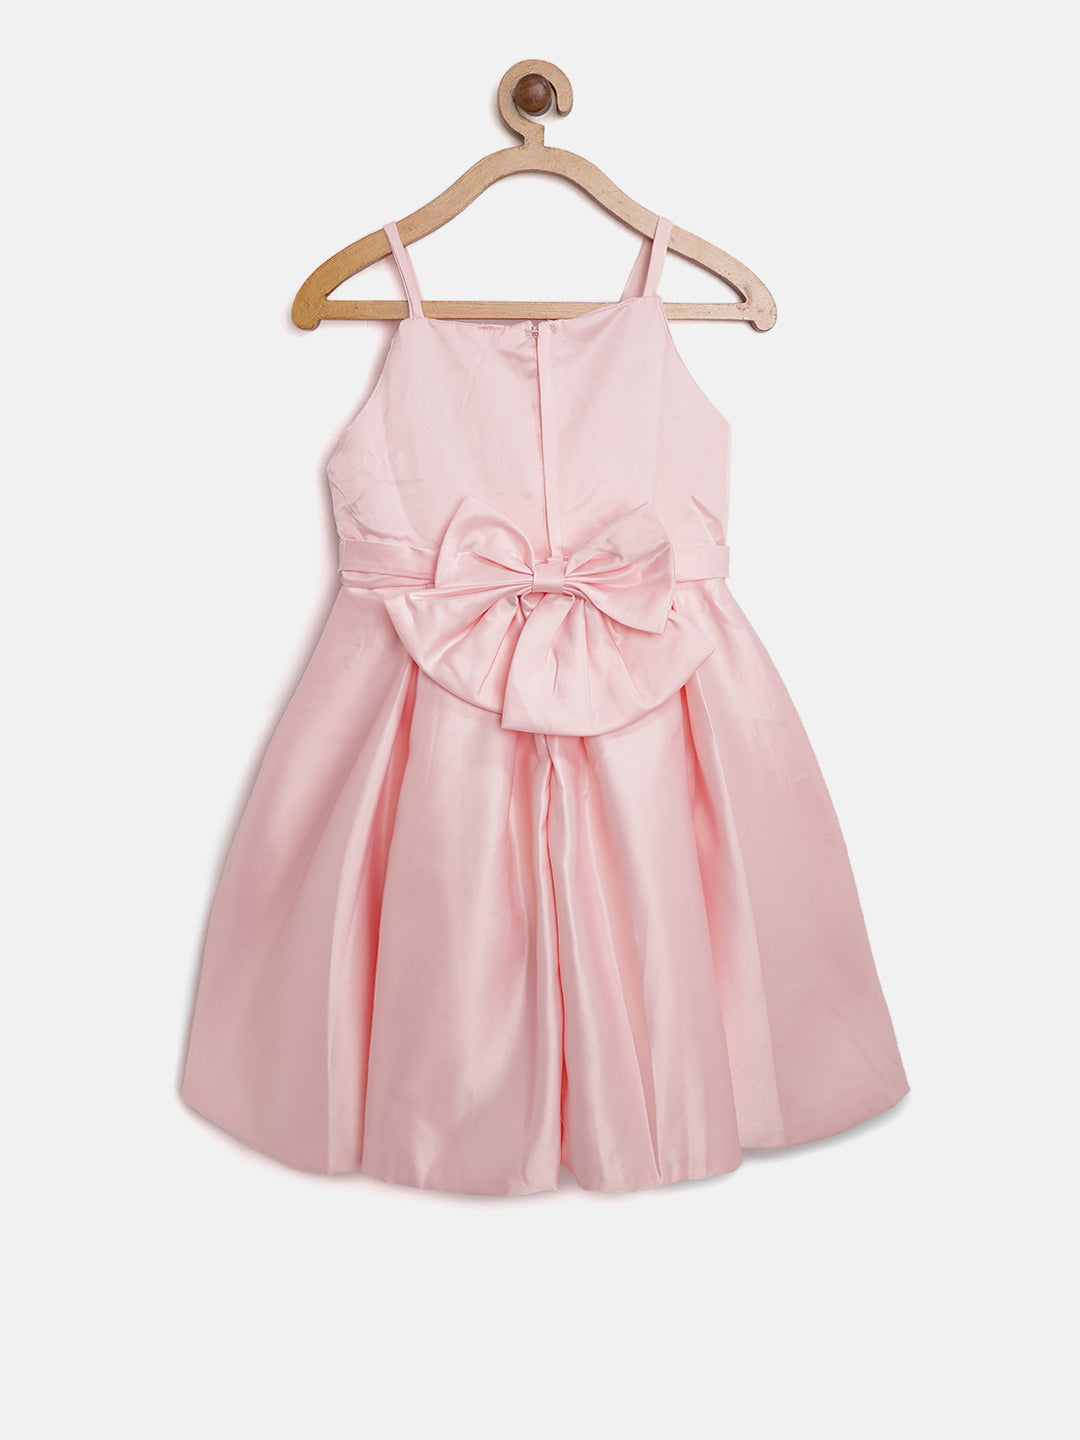 Girls Pink Pleated and embellished Party Dress with beautiful back Bow